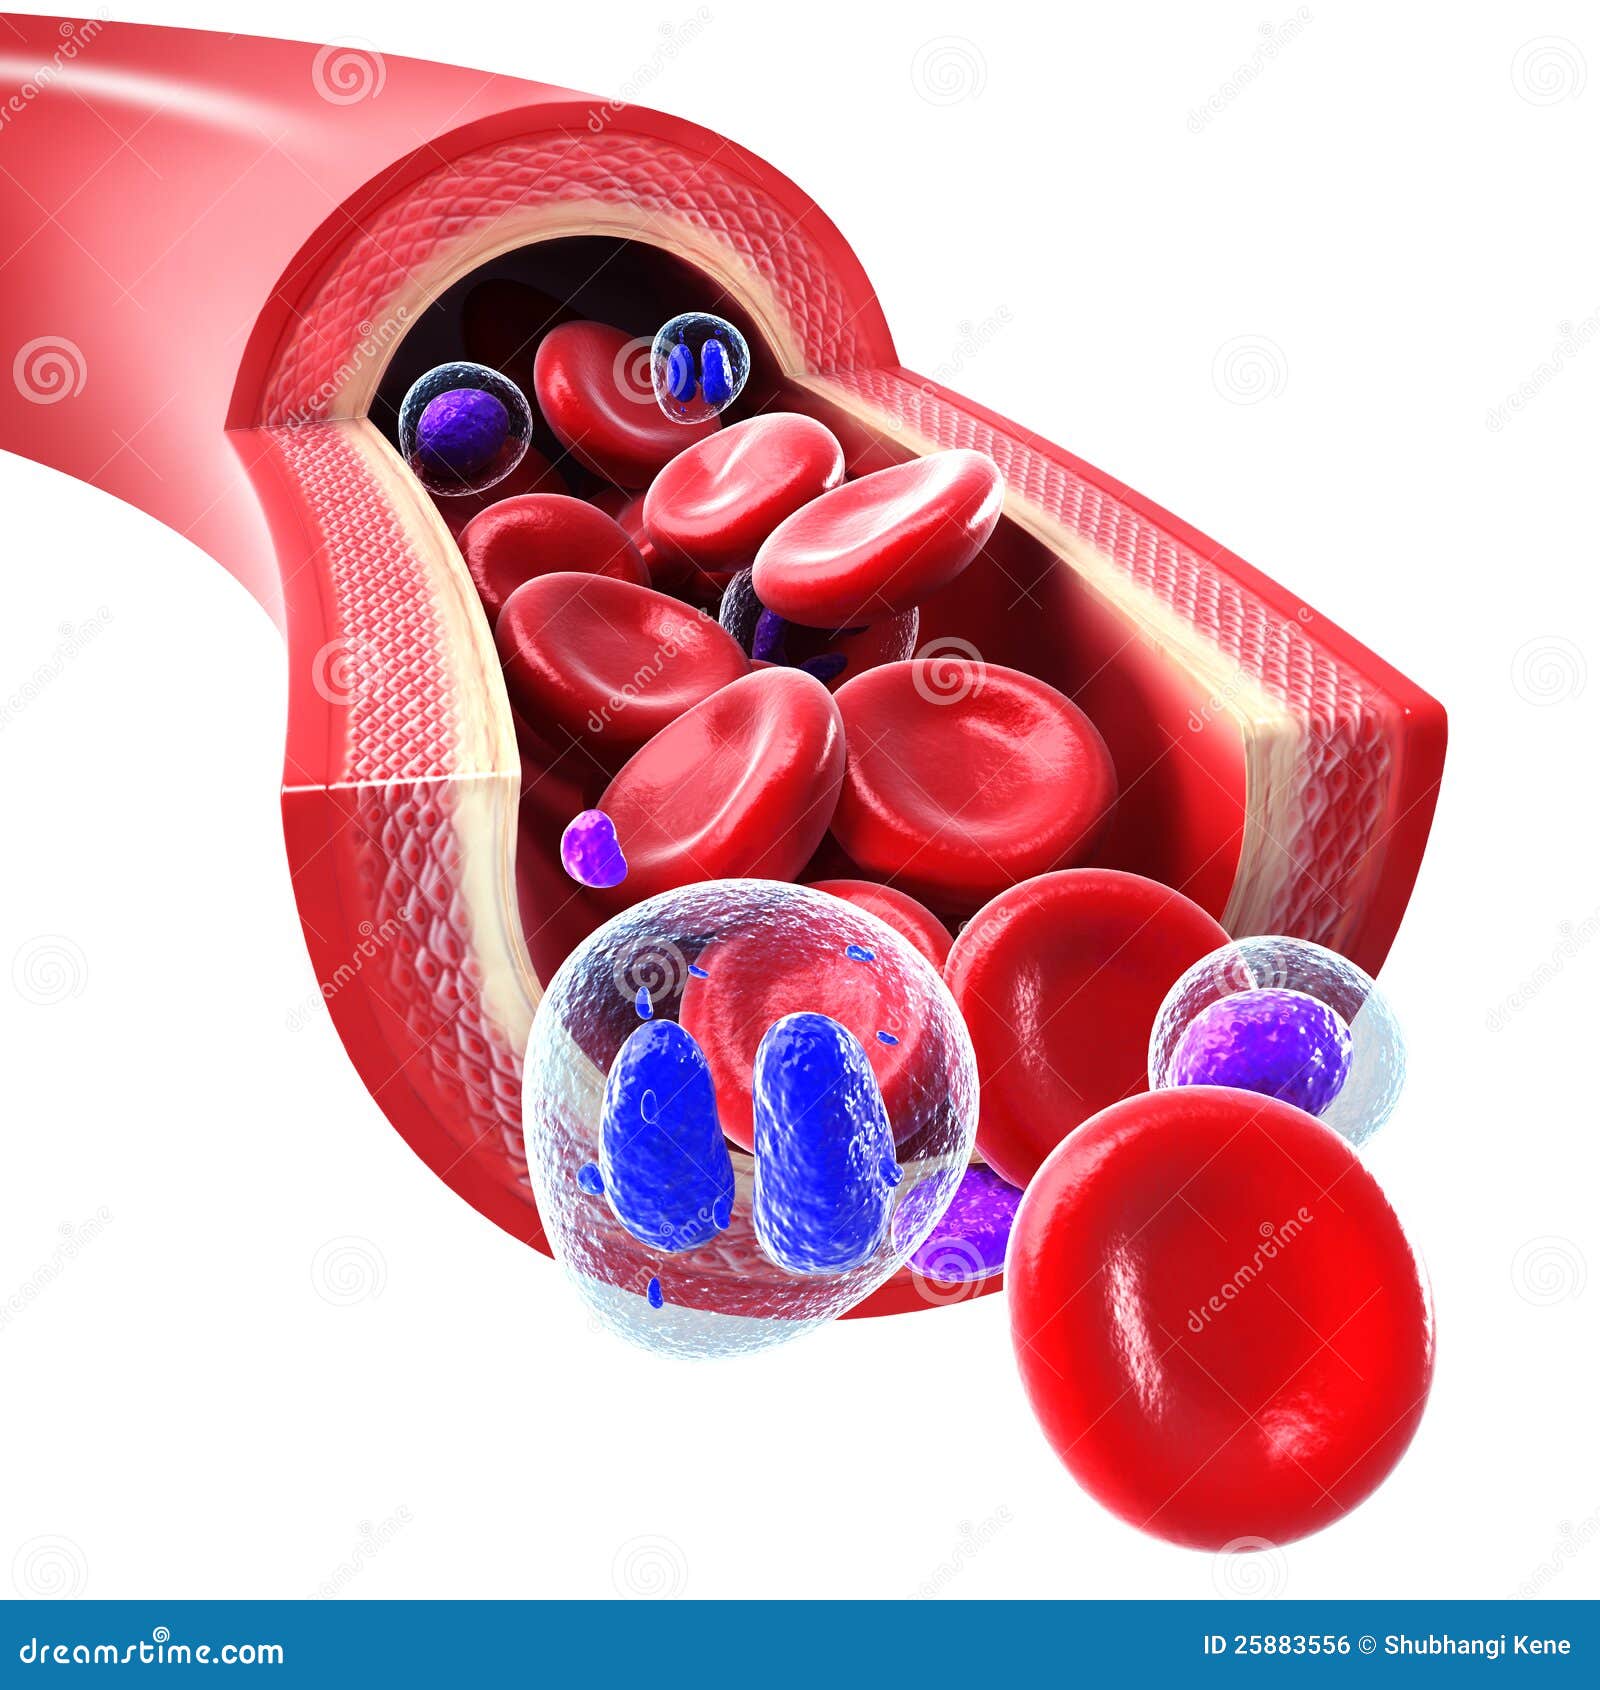 red blood cells flowing through a vein and artery